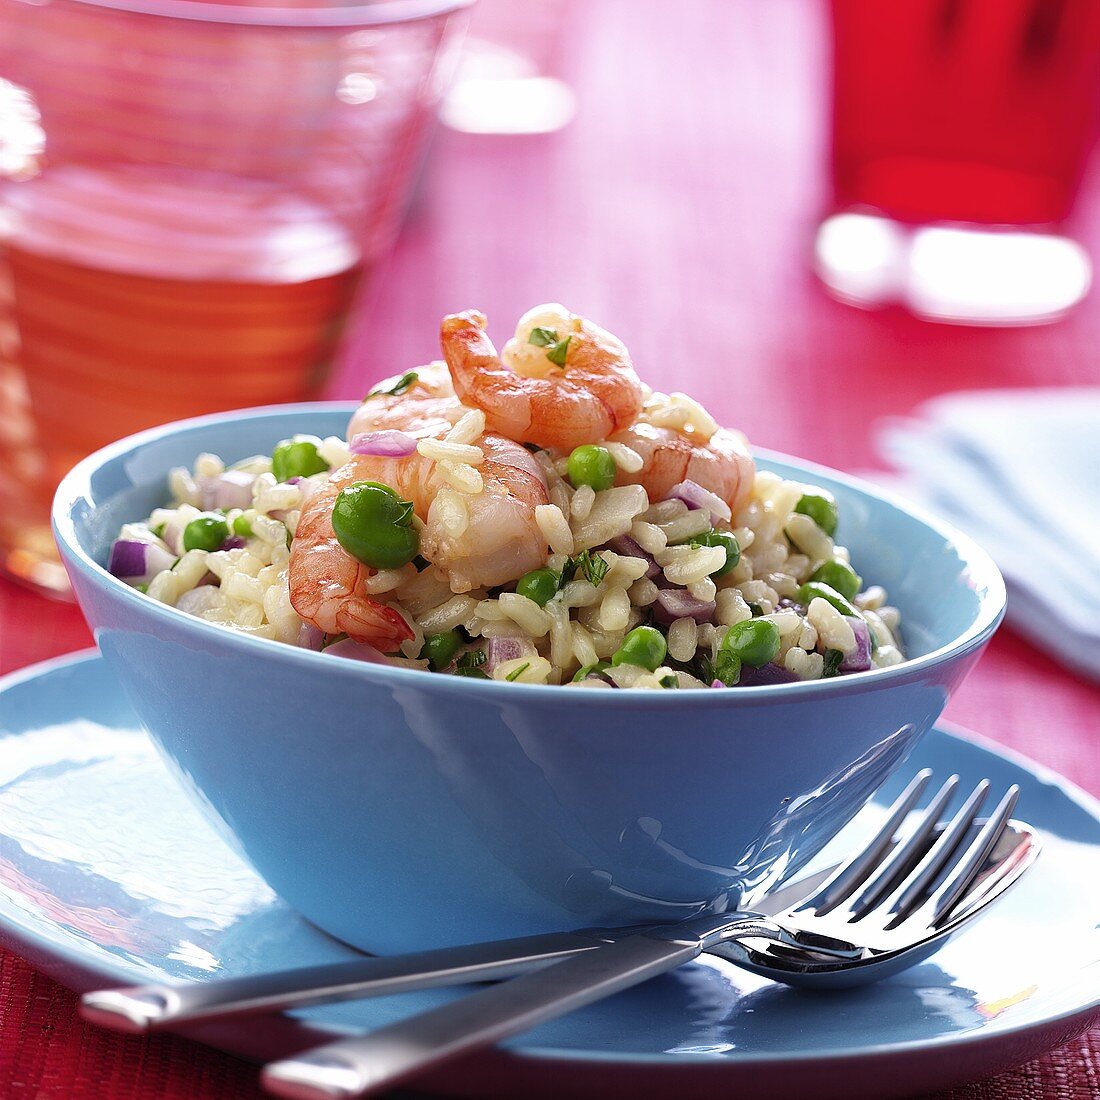 Risotto orto e mare (Rice with shrimps and beans, Italy)